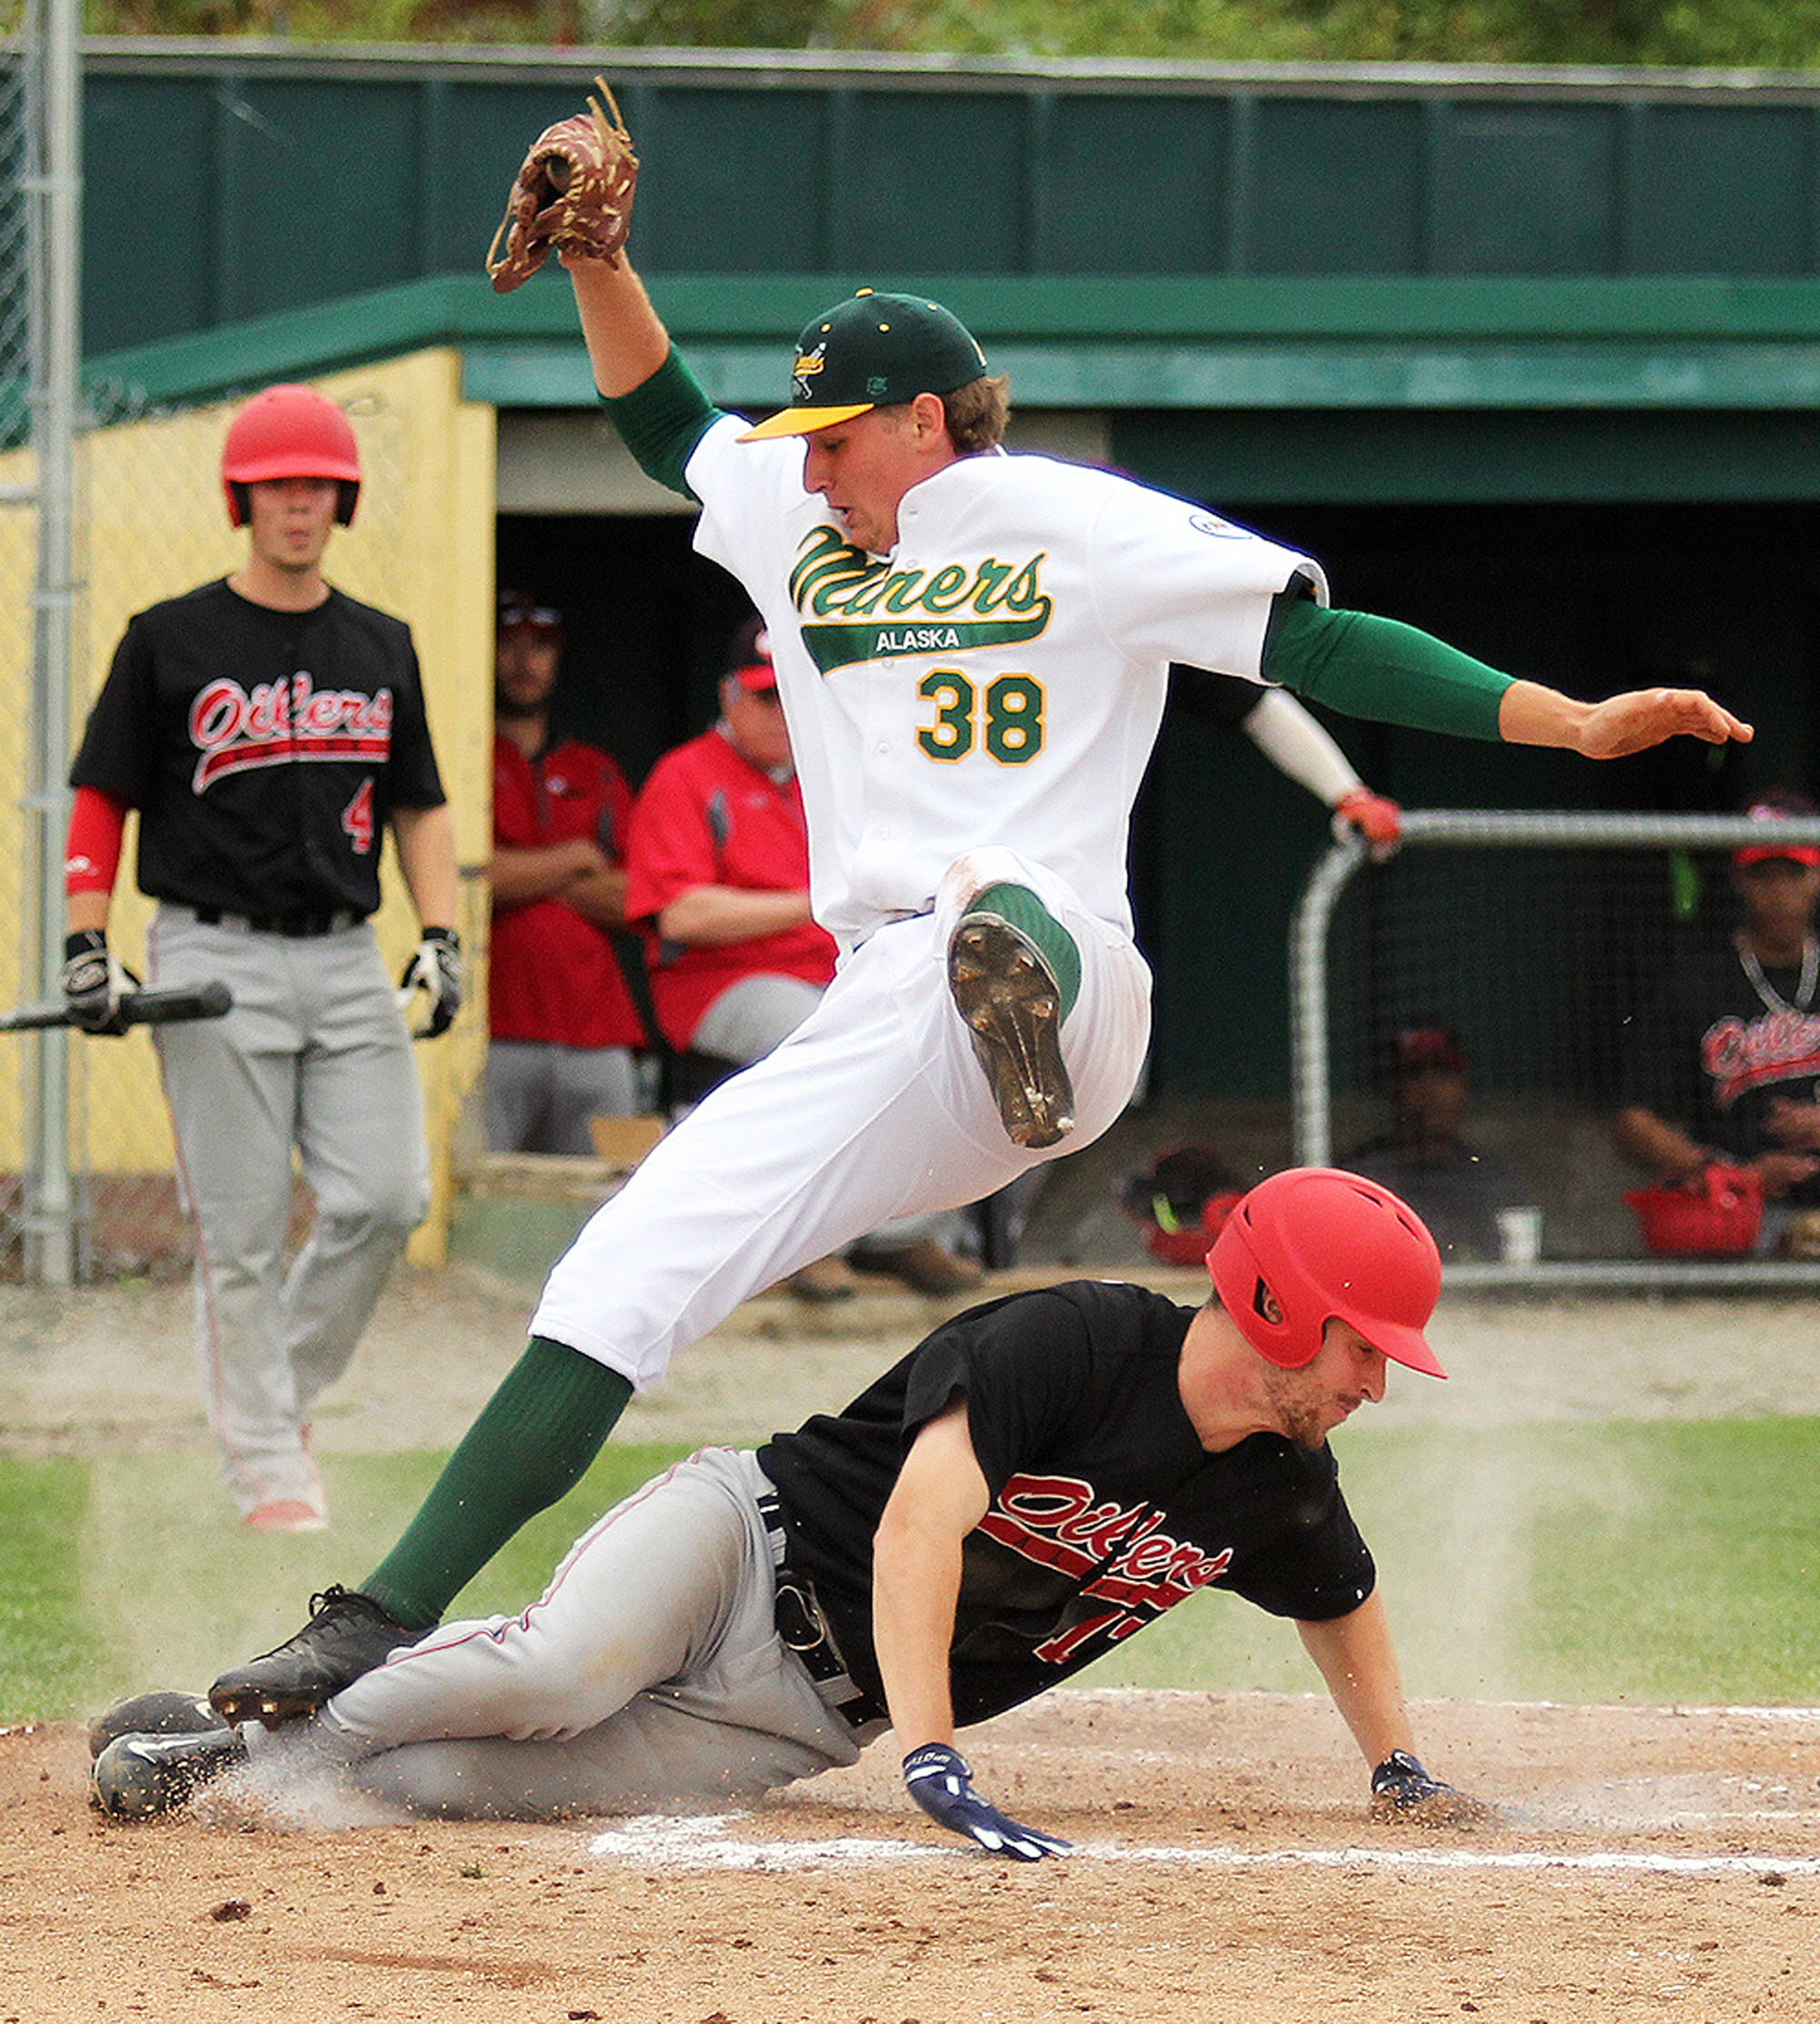 Mat-Su pitcher John Doxakis falls over Peninsula Oilers outfielder Thomas Ruddy after Doxakis reached up to snag a high throw as Ruddy slides into home to score the go-ahead run during a 2-1 victory over the Miners Friday at Hermon Brothers Field in Palmer. (Photo by Jeremiah Bartz/Frontiersman)